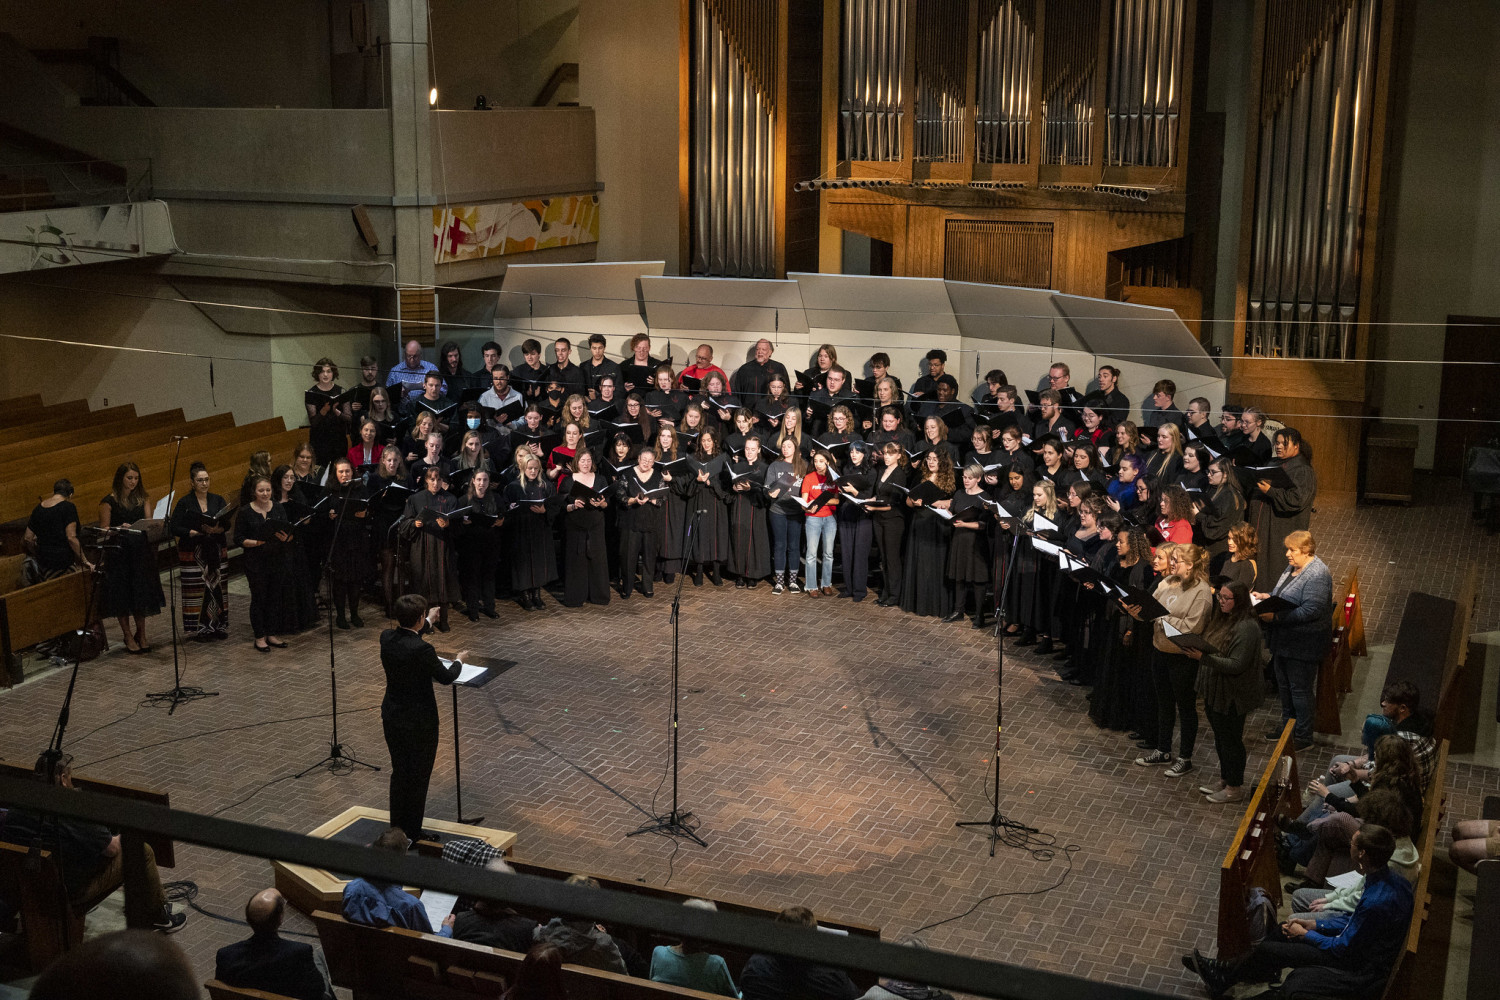 The annual Homecoming Concert, with performances by the Carthage Choir, the Carthage Wind Orchest...